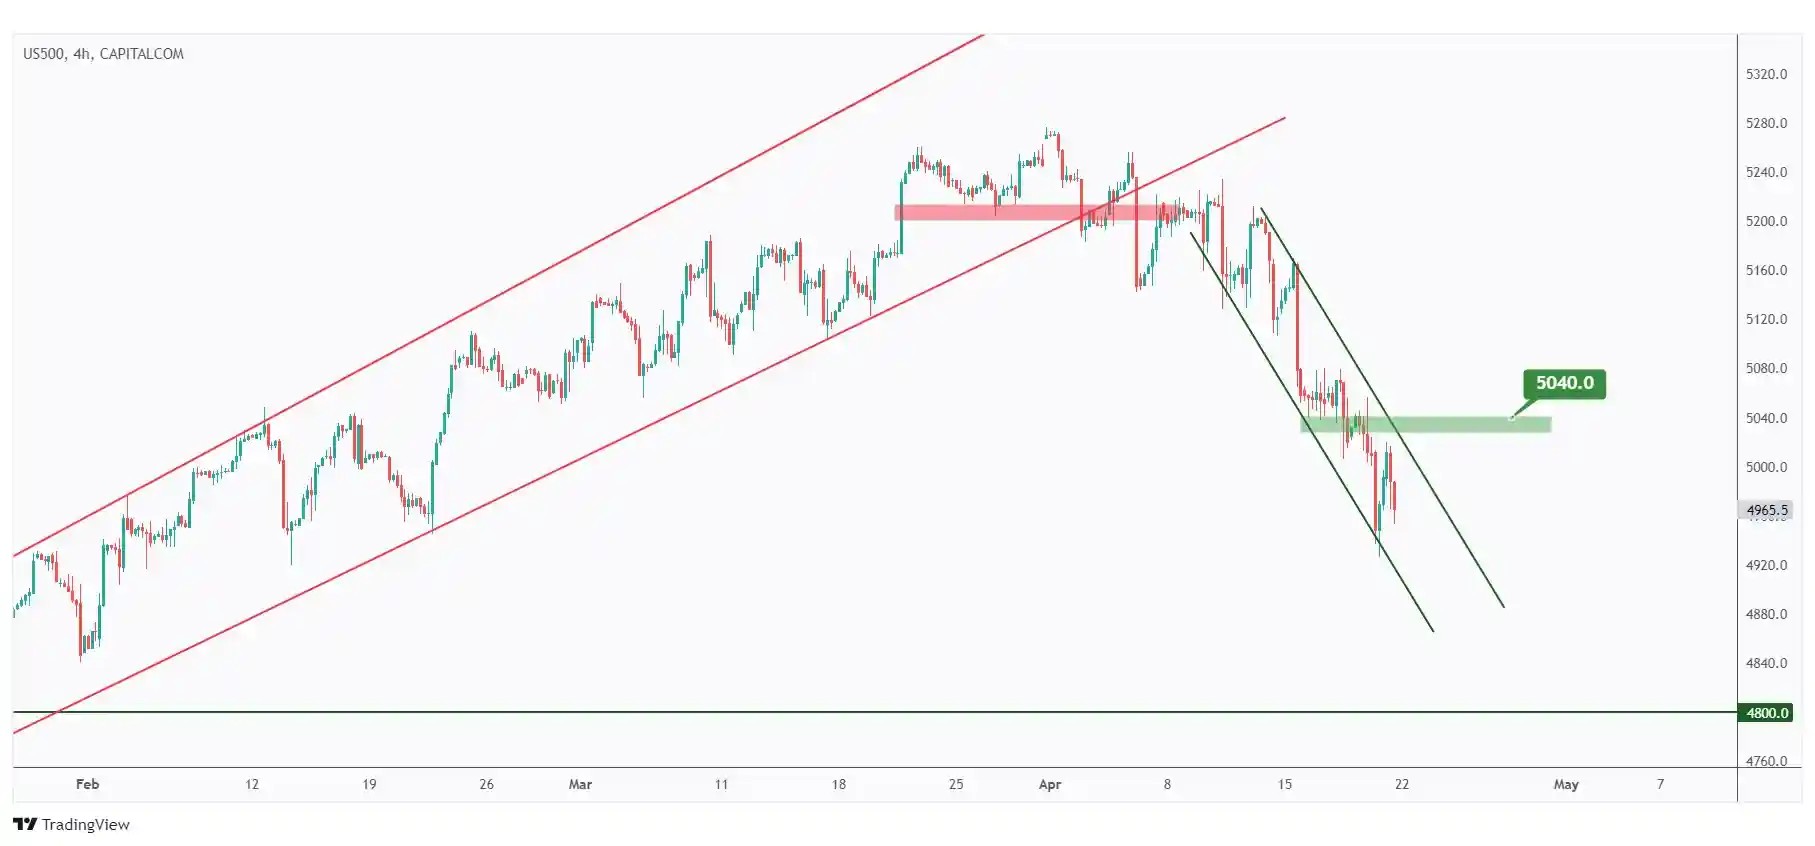 US500 4h chart overall bearish trading within the falling channel.